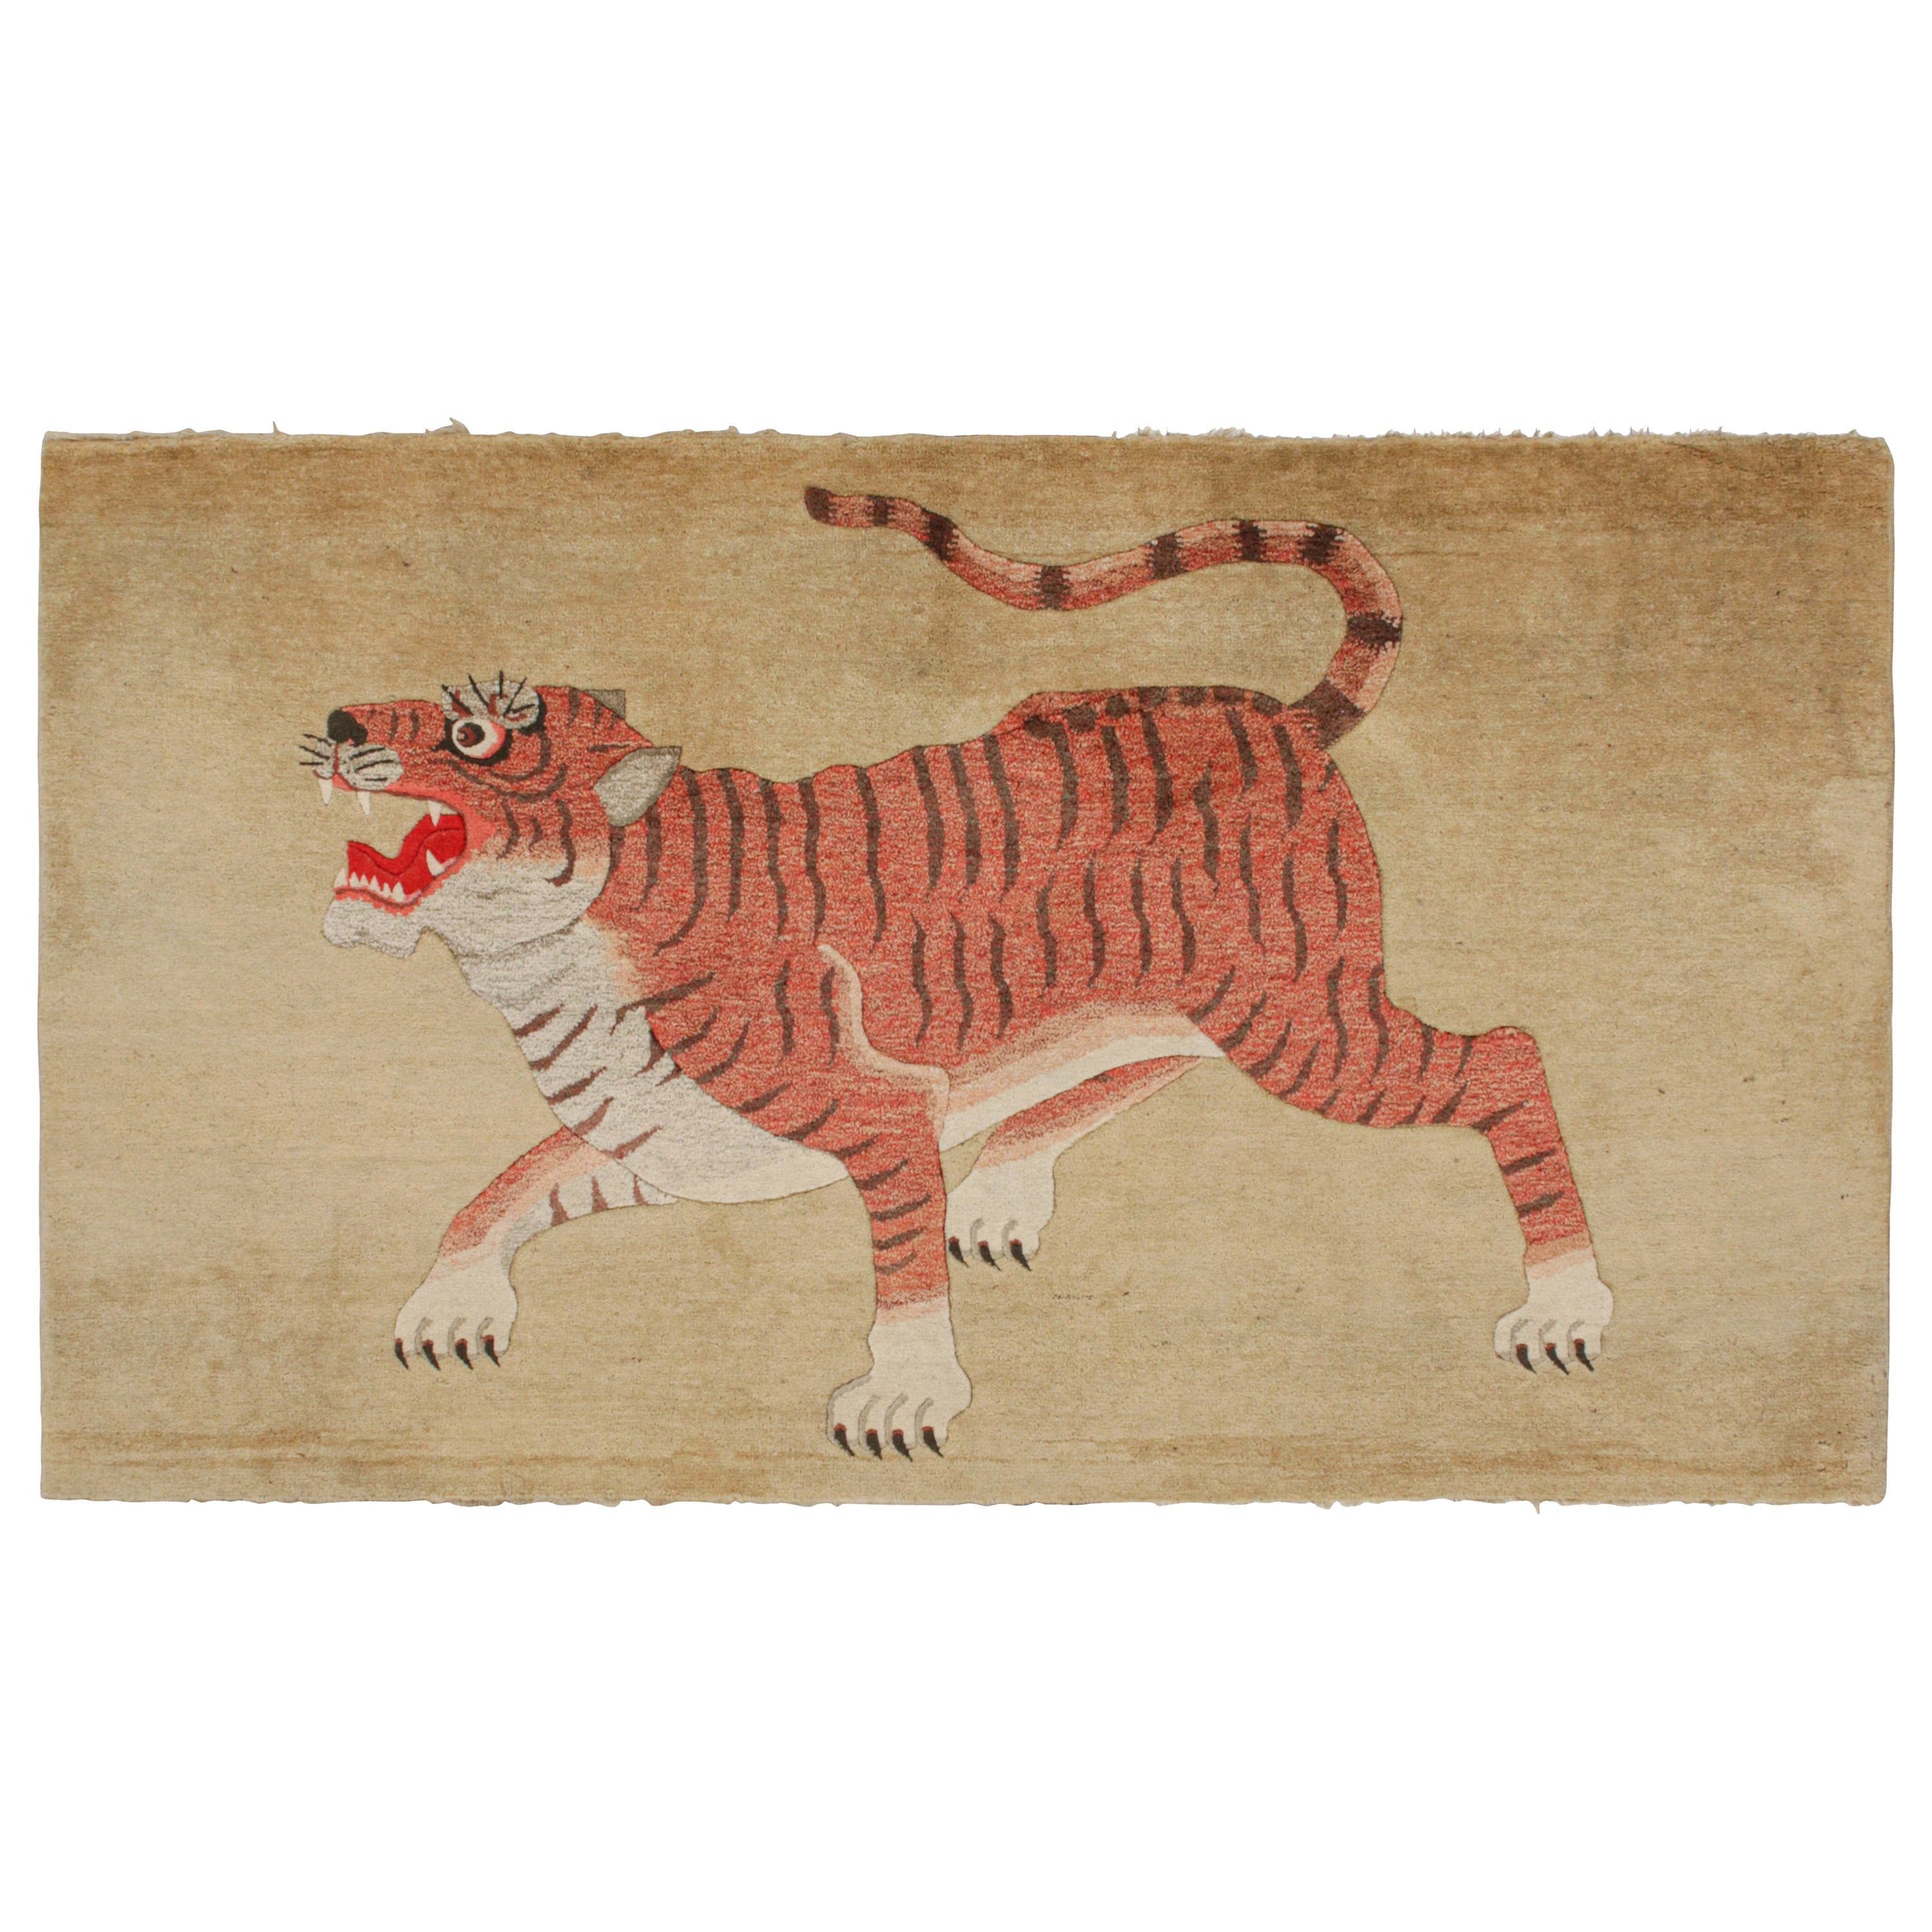 Antique Tiger Runner Rug in Beige-Brown with Red Pictorial, from Rug & Kilim